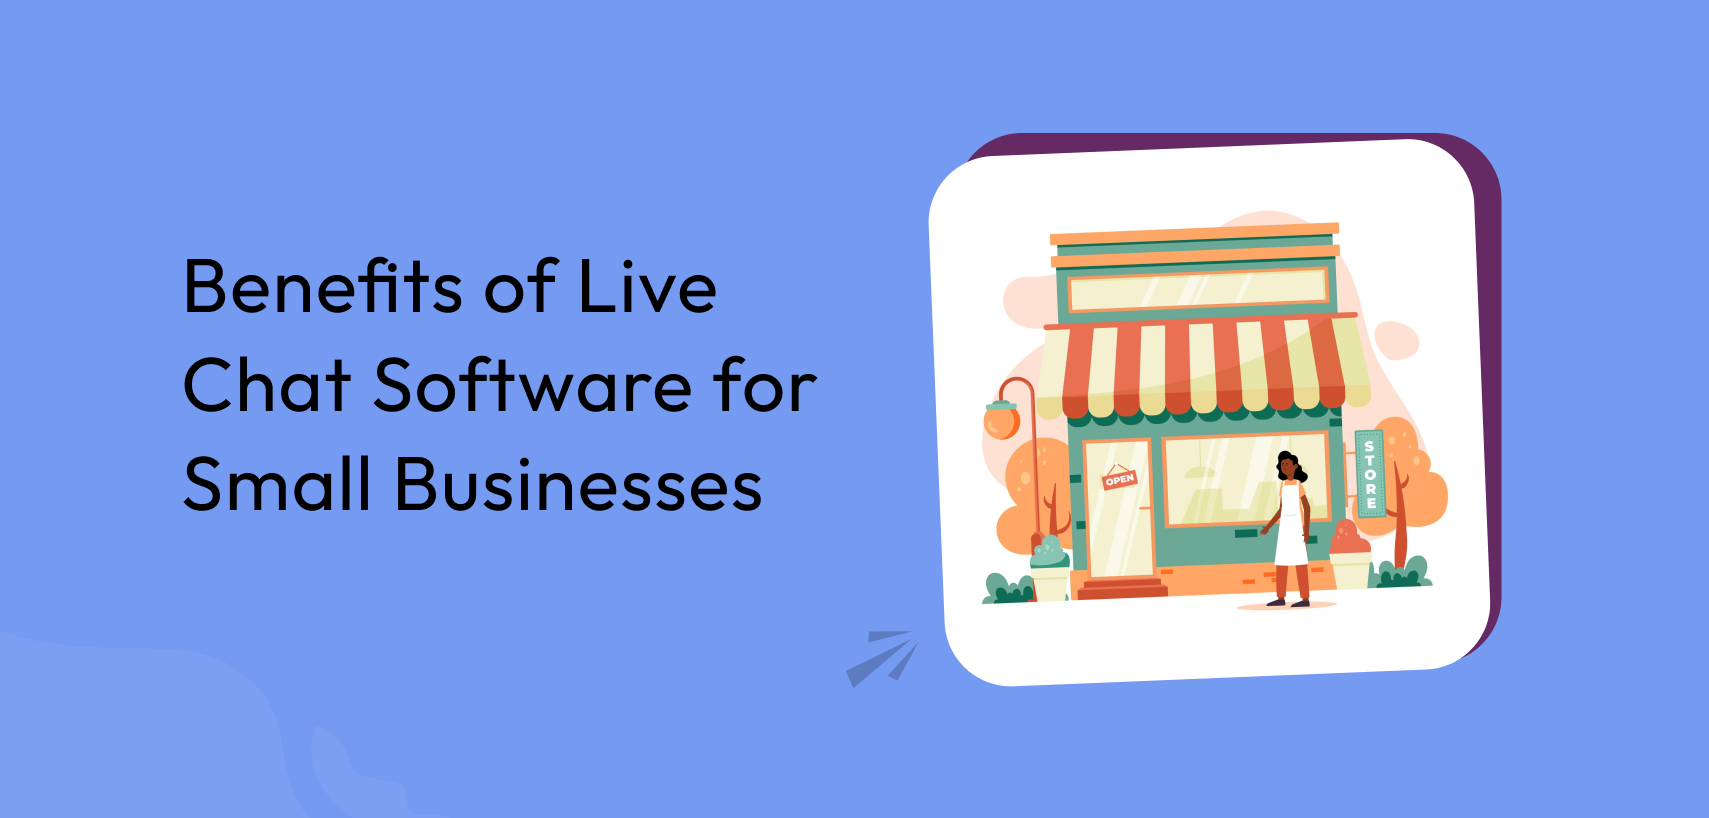 Benefits of Live Chat for Small Businesses